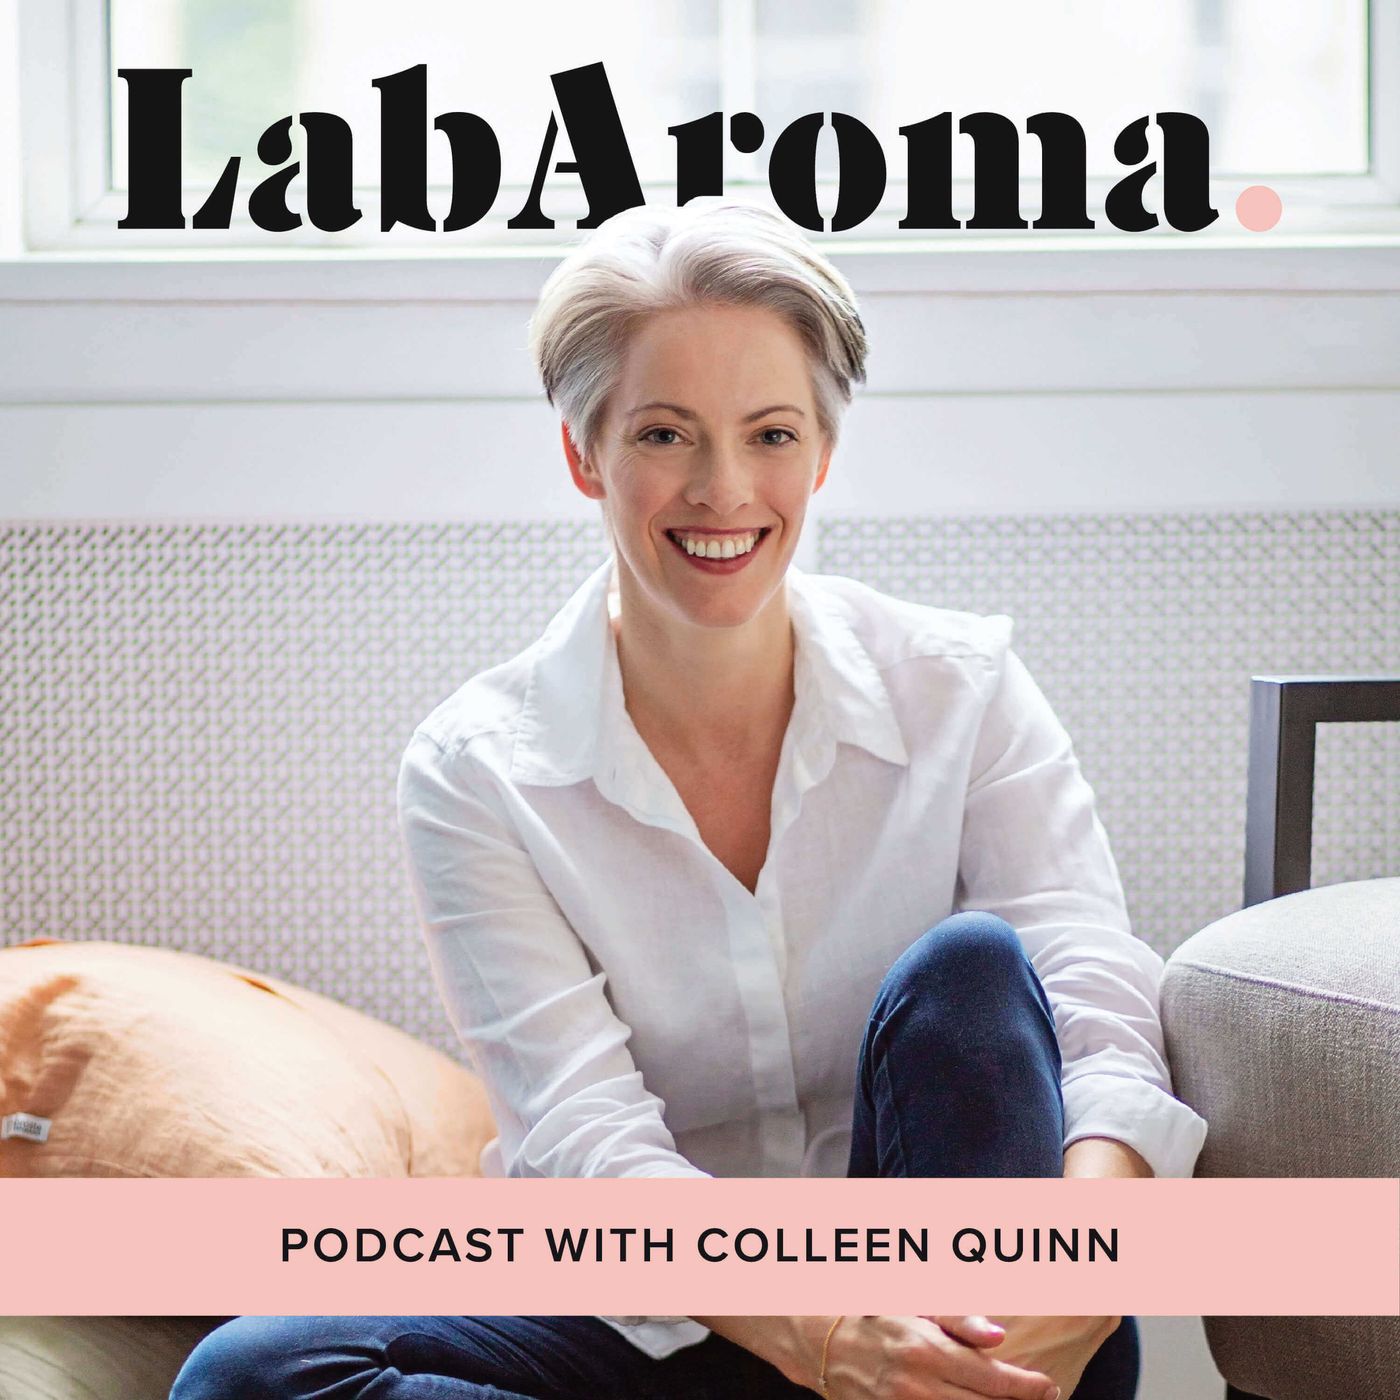 The LabAroma Podcast by Colleen Quinn